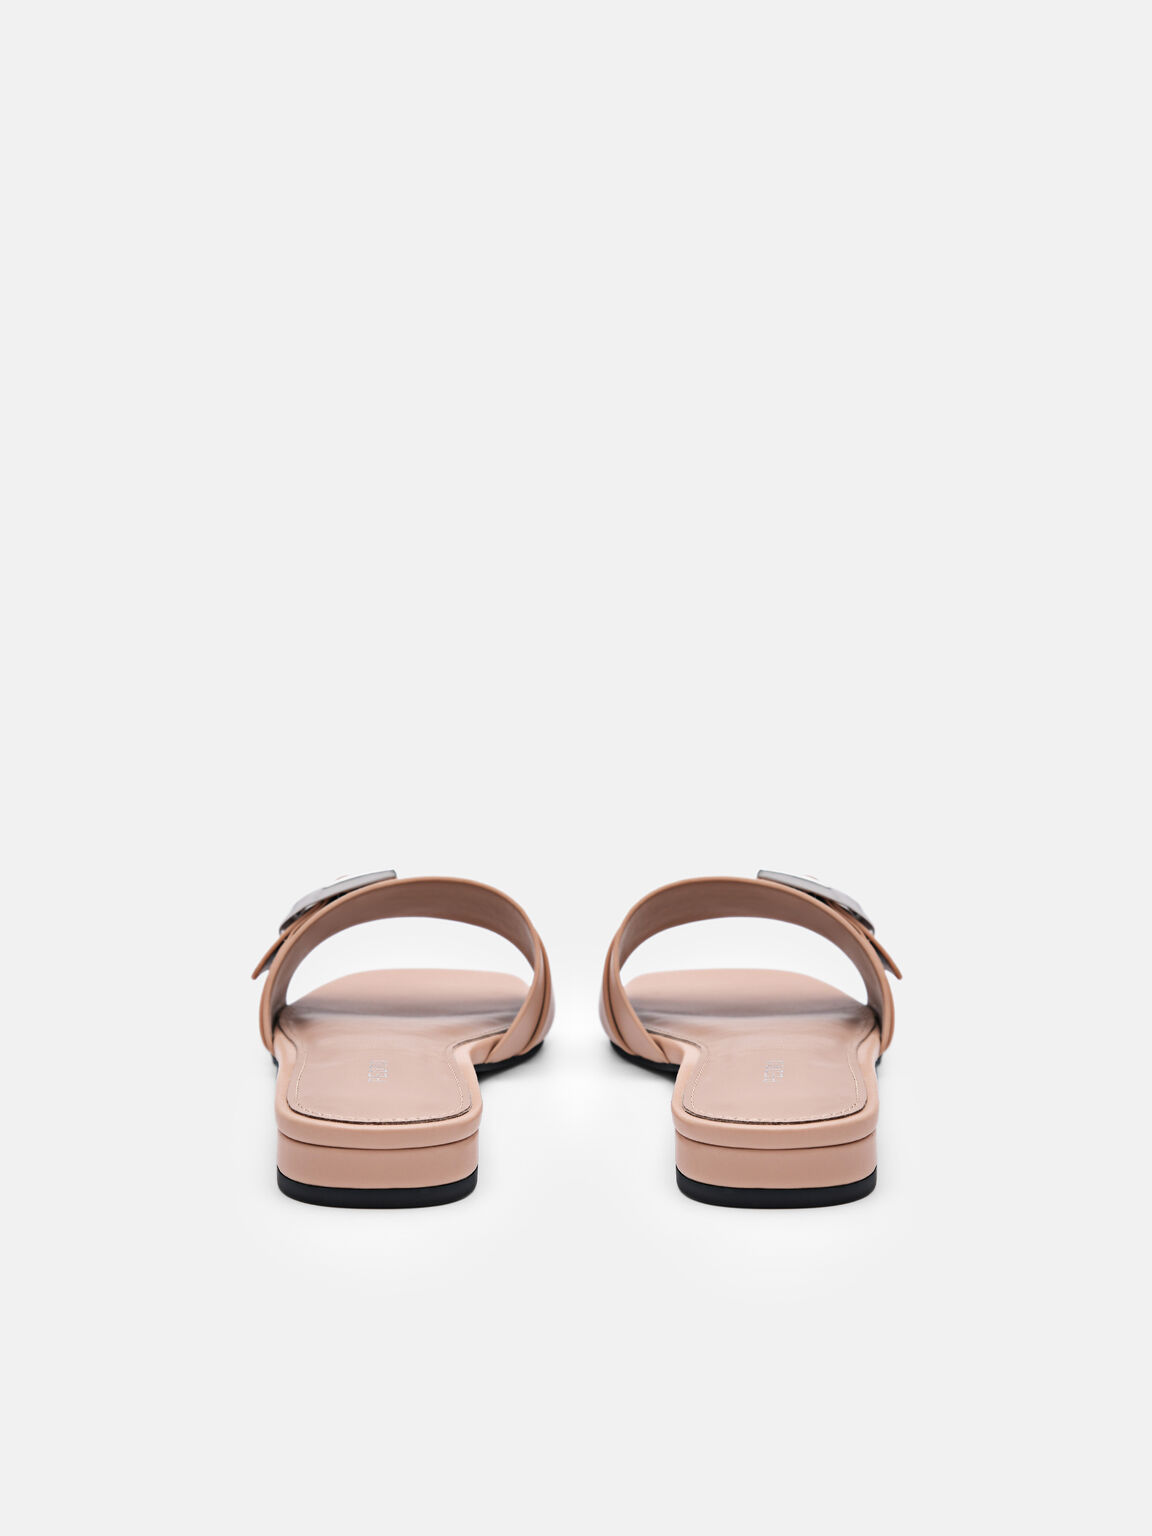 Helix Buckle Sandals, Taupe, hi-res